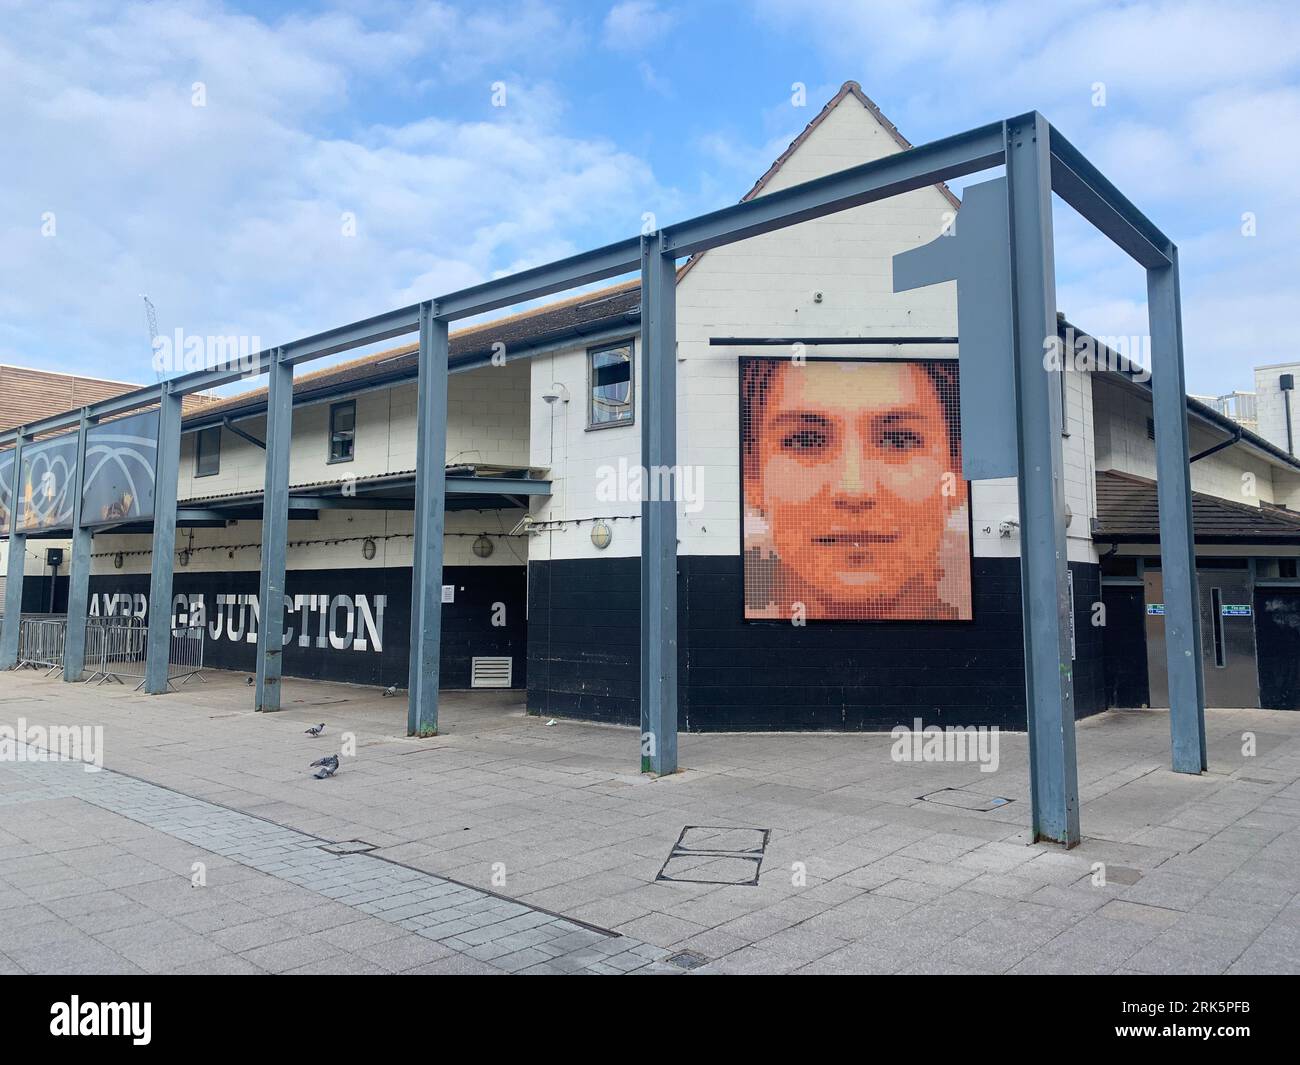 A face-shaped portrait hangs on the side of a building in the corner of Cambridge, United Kingdom Stock Photo